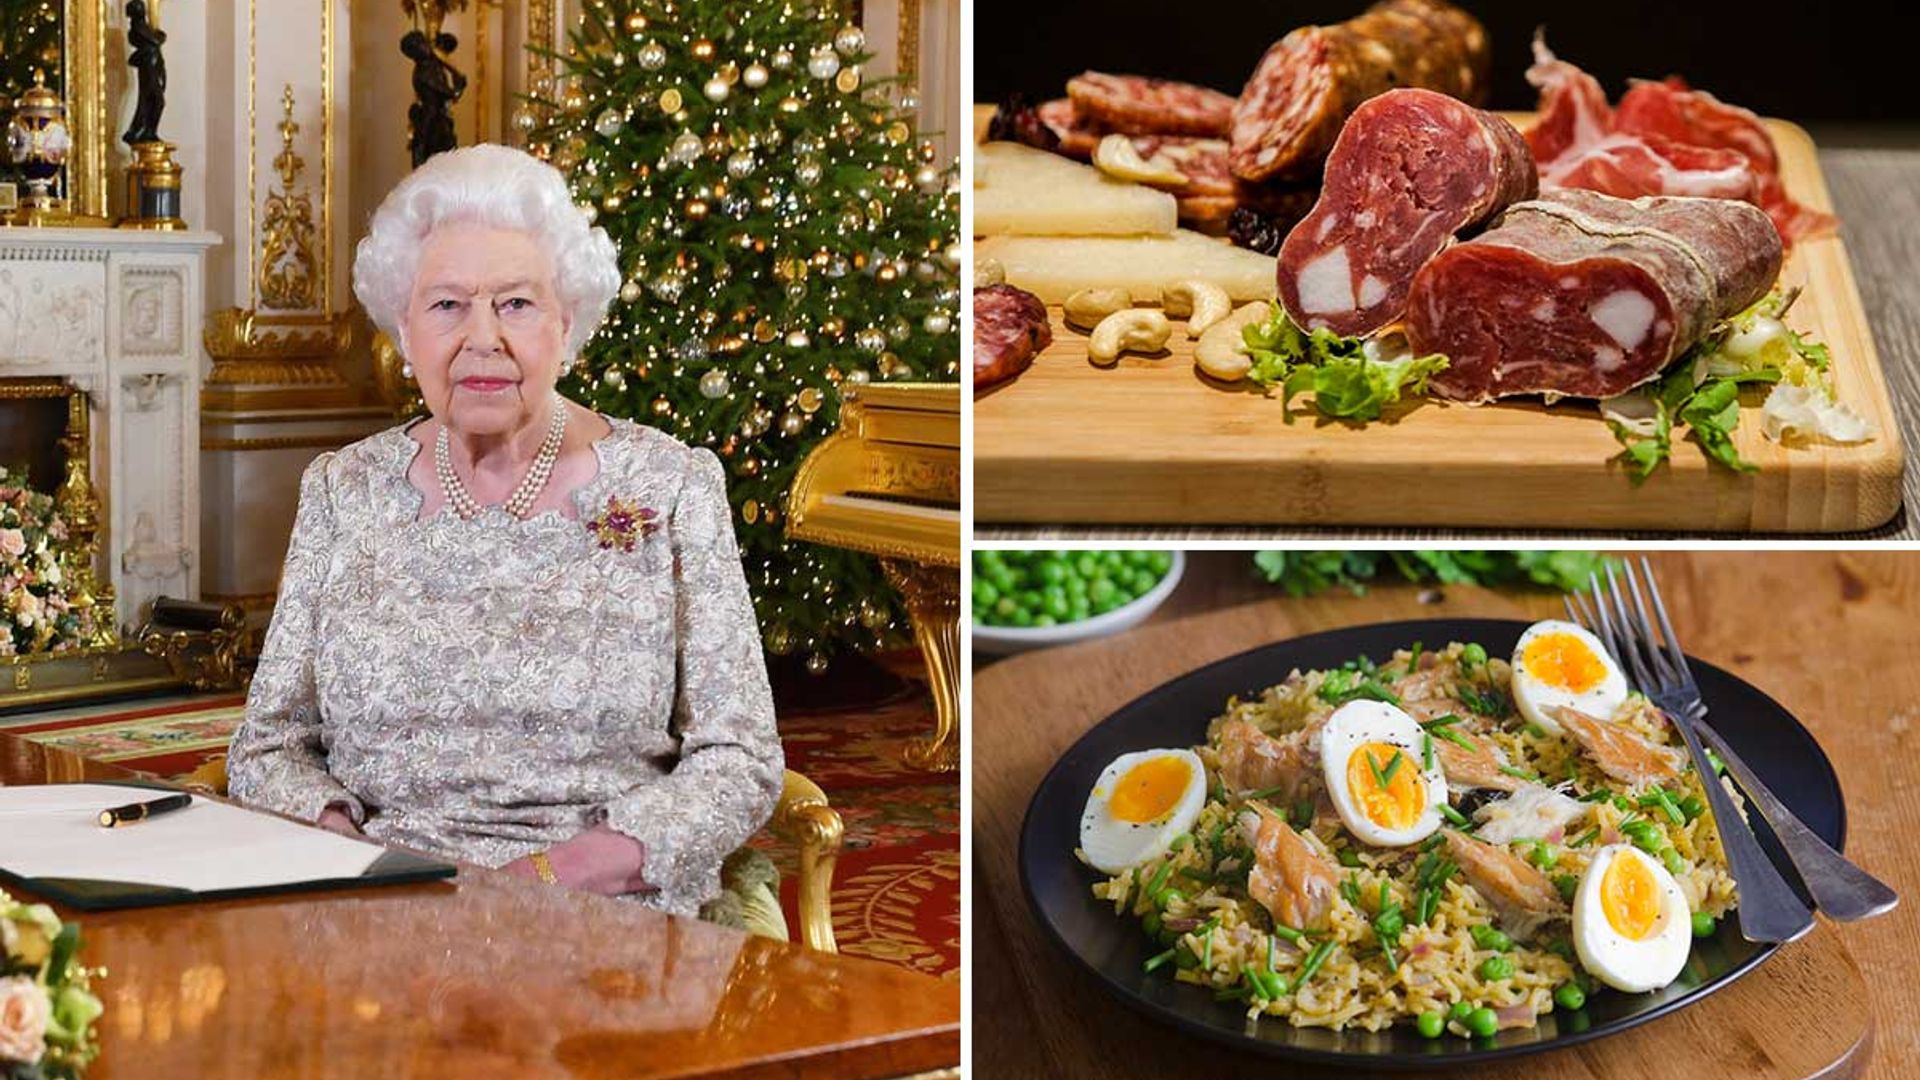 The Queen's controversial Boxing Day menu will divide the nation